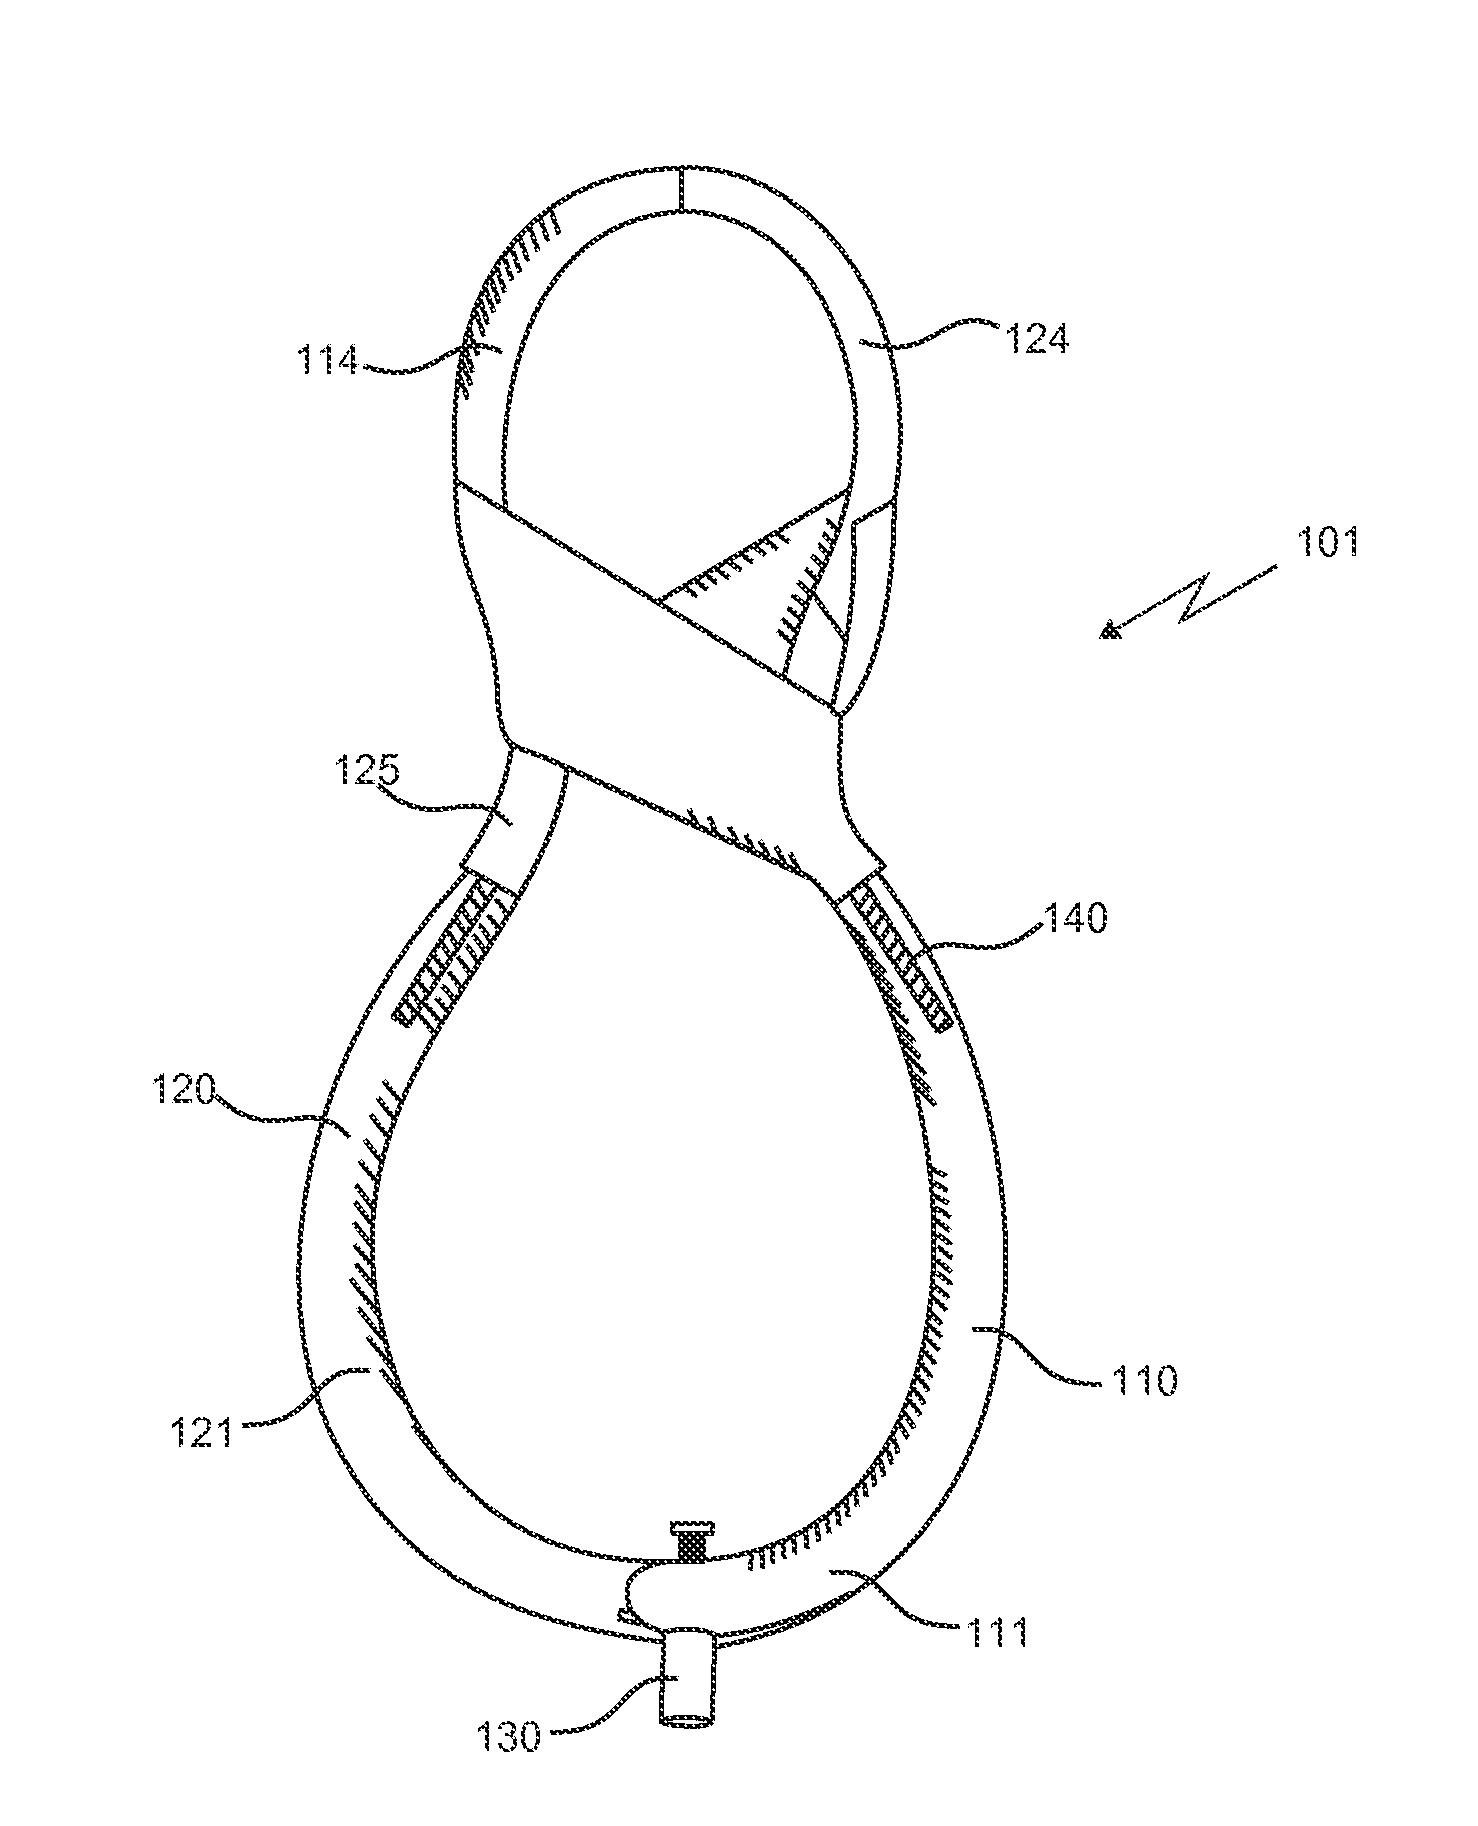 Minimally invasive device for surgical operations